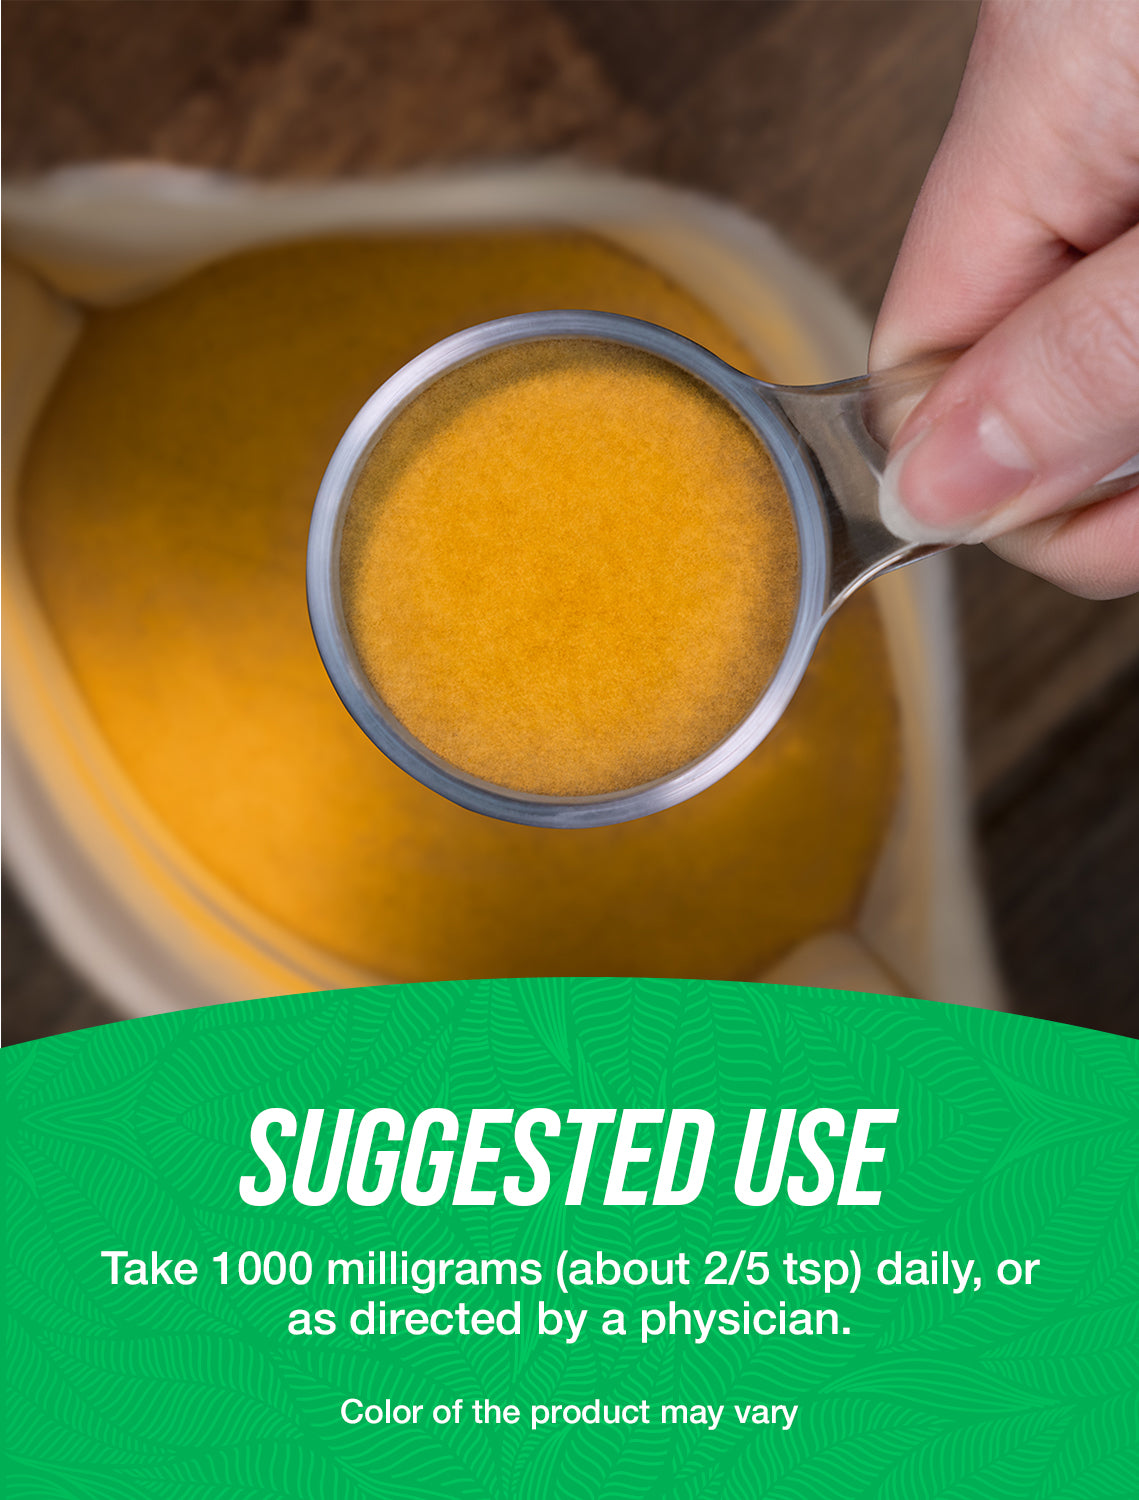 Turmeric extract powder suggested use image